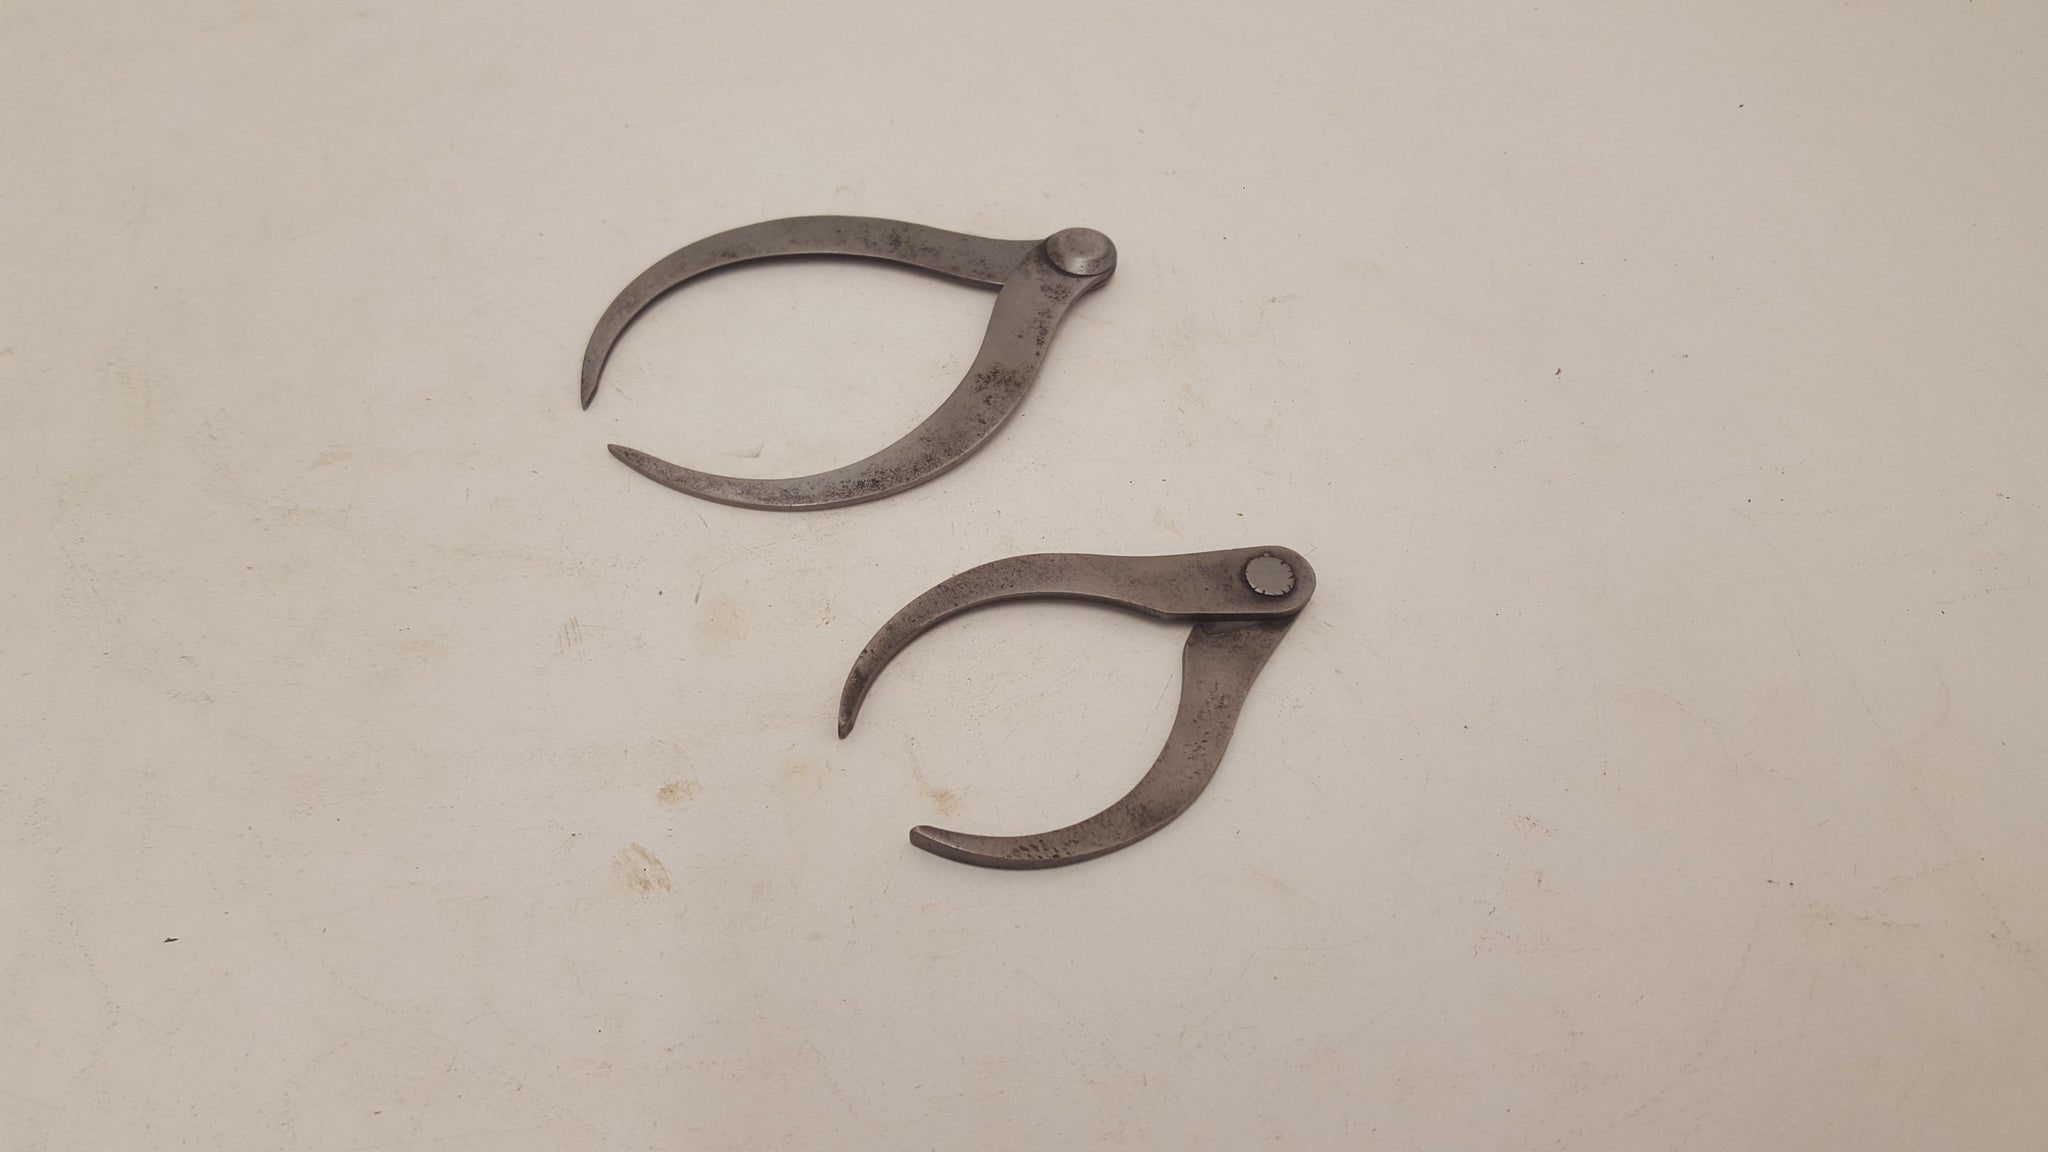 Pair of Unnamed Vintage Outside Calipers 4 & 3" 23851